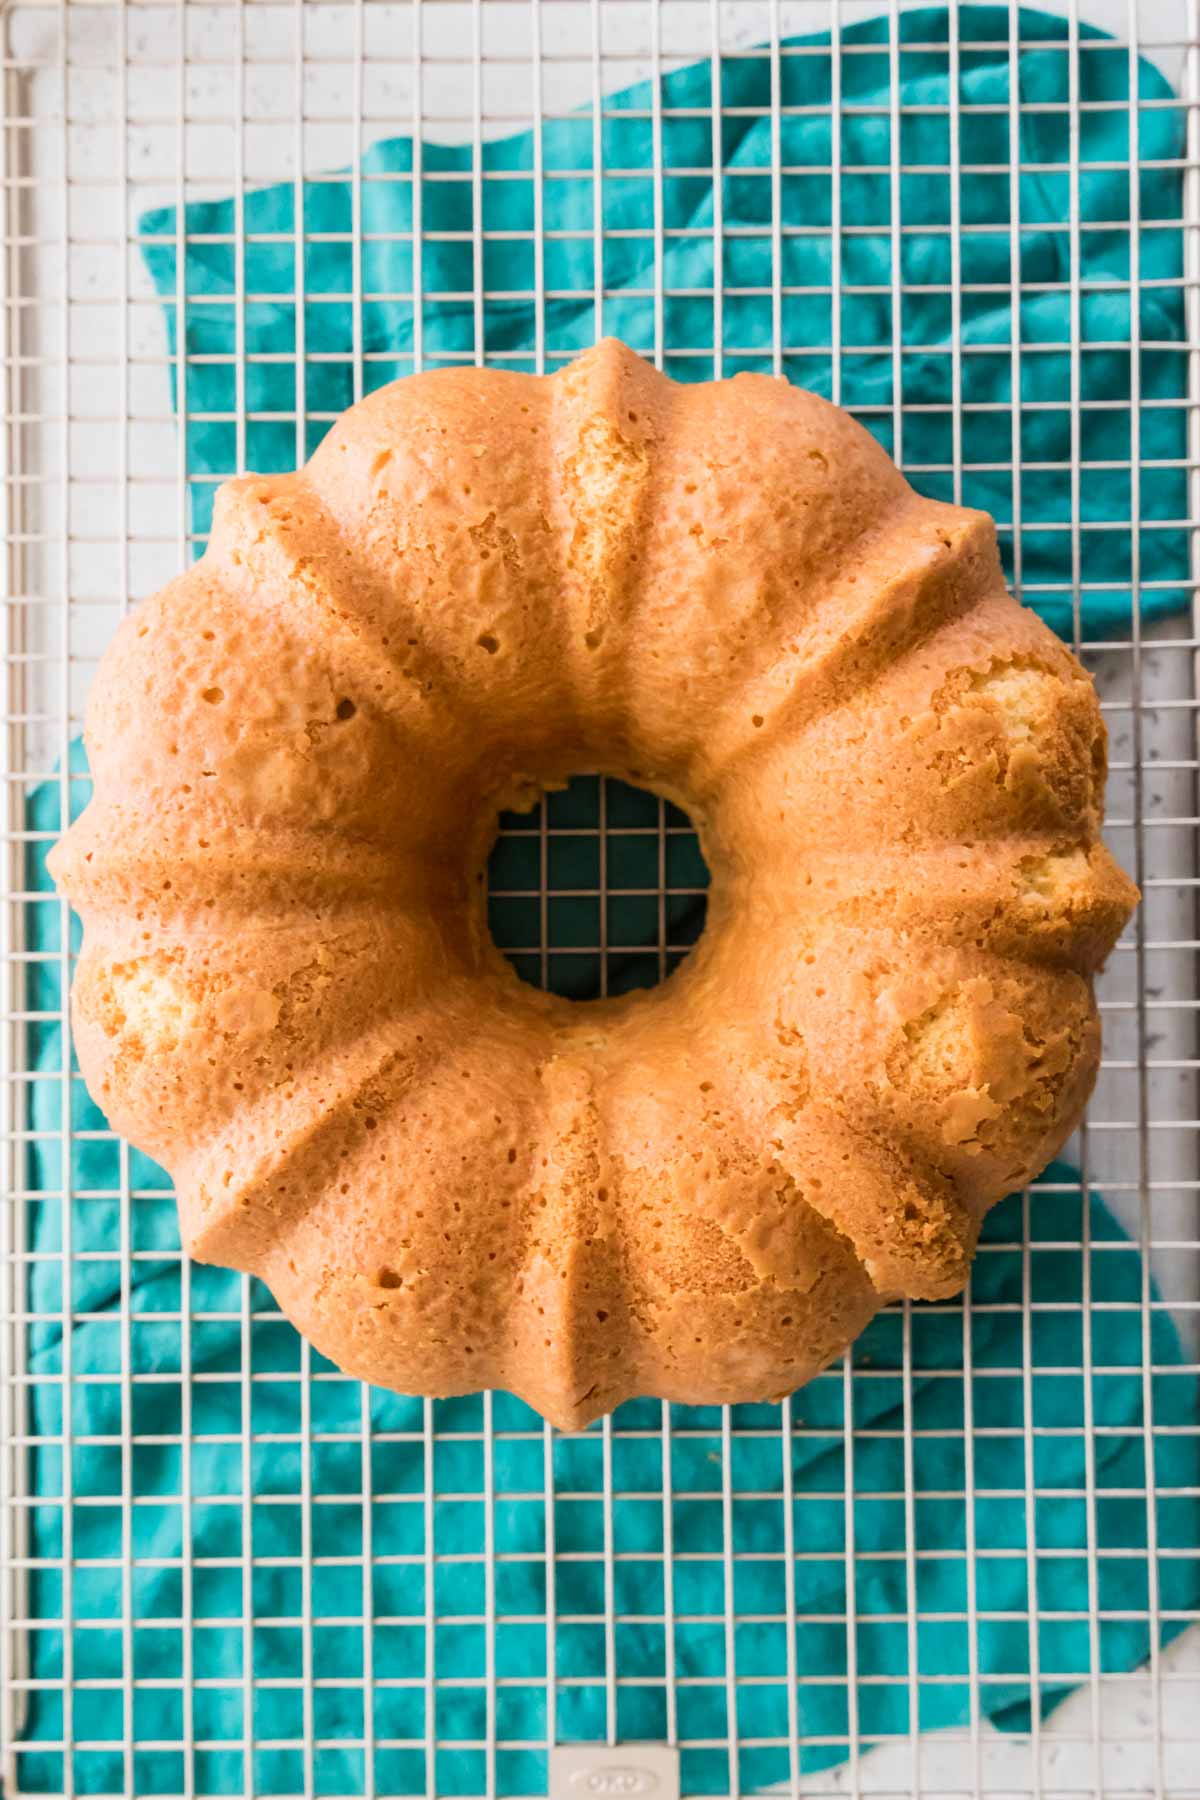 overhead view of a whole golden brown bundt cake on a cooling rack with a teal towel underneath